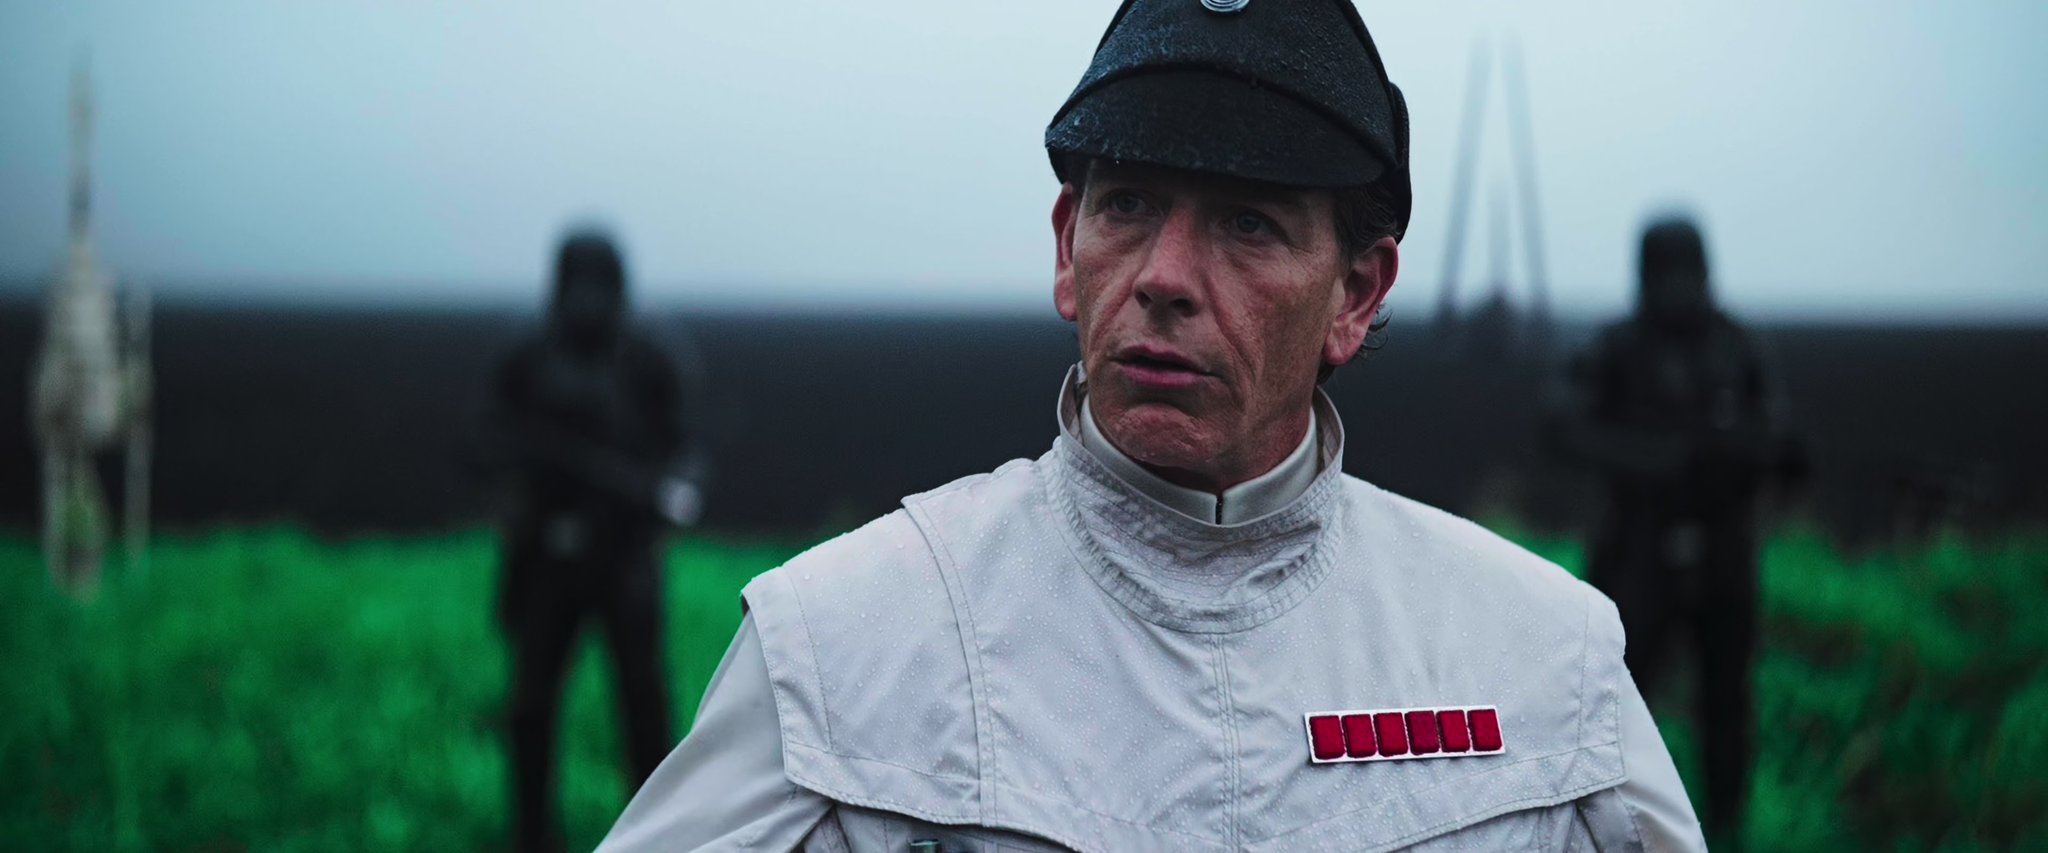 Happy birthday to Ben Mendelsohn who played Director Krennic in Rogue One: A Star Wars Story! 